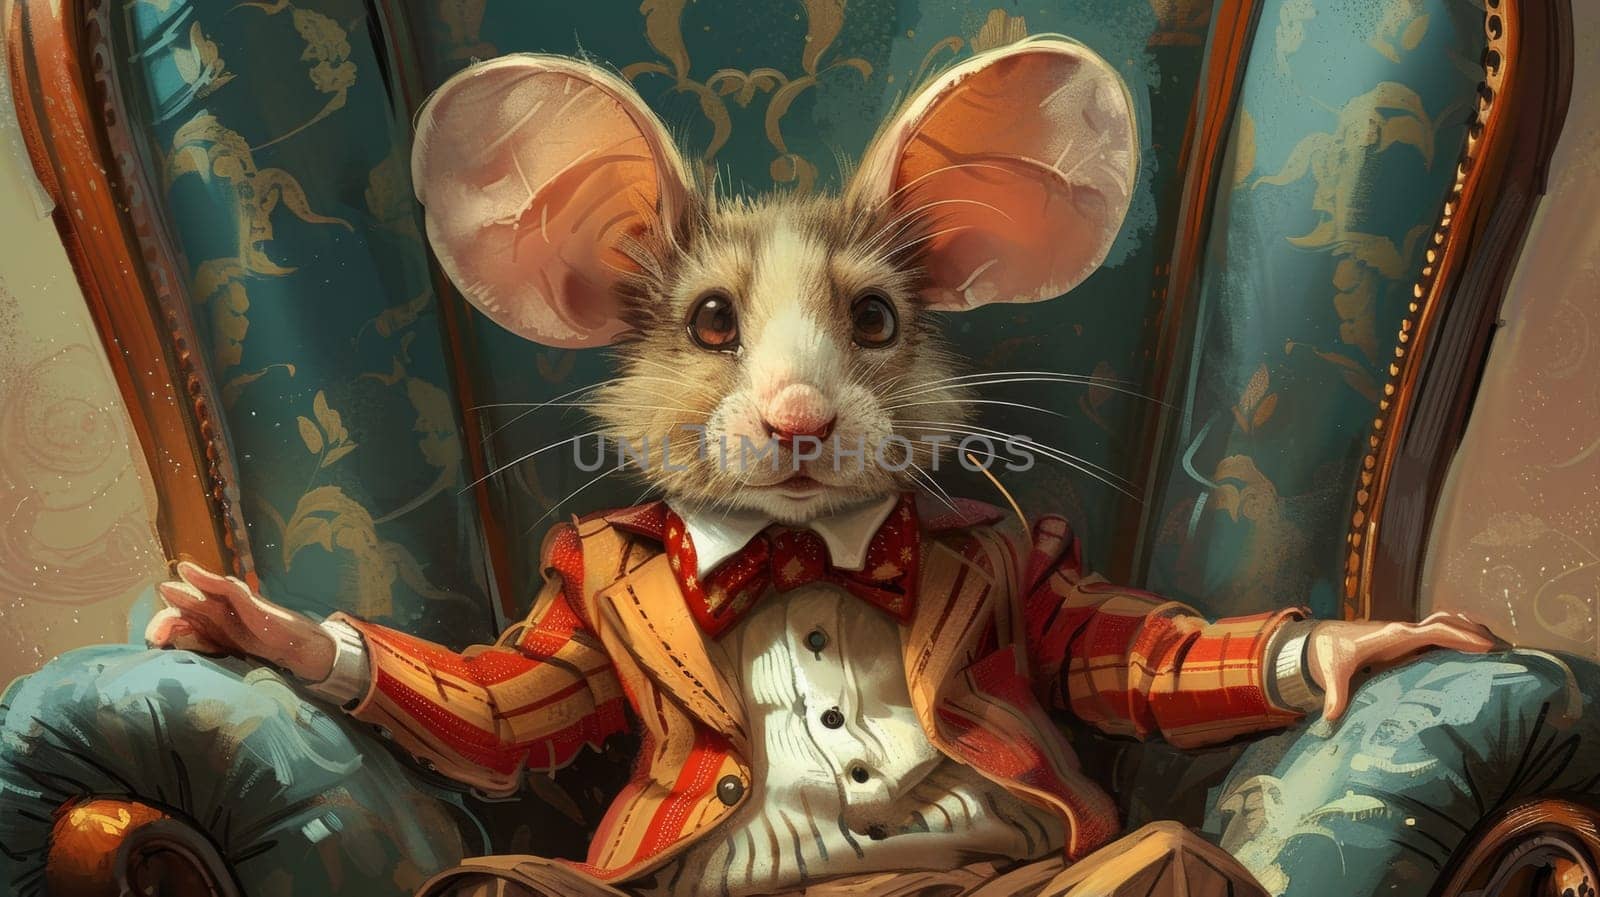 A mouse in a suit sitting on top of an ornate chair, AI by starush